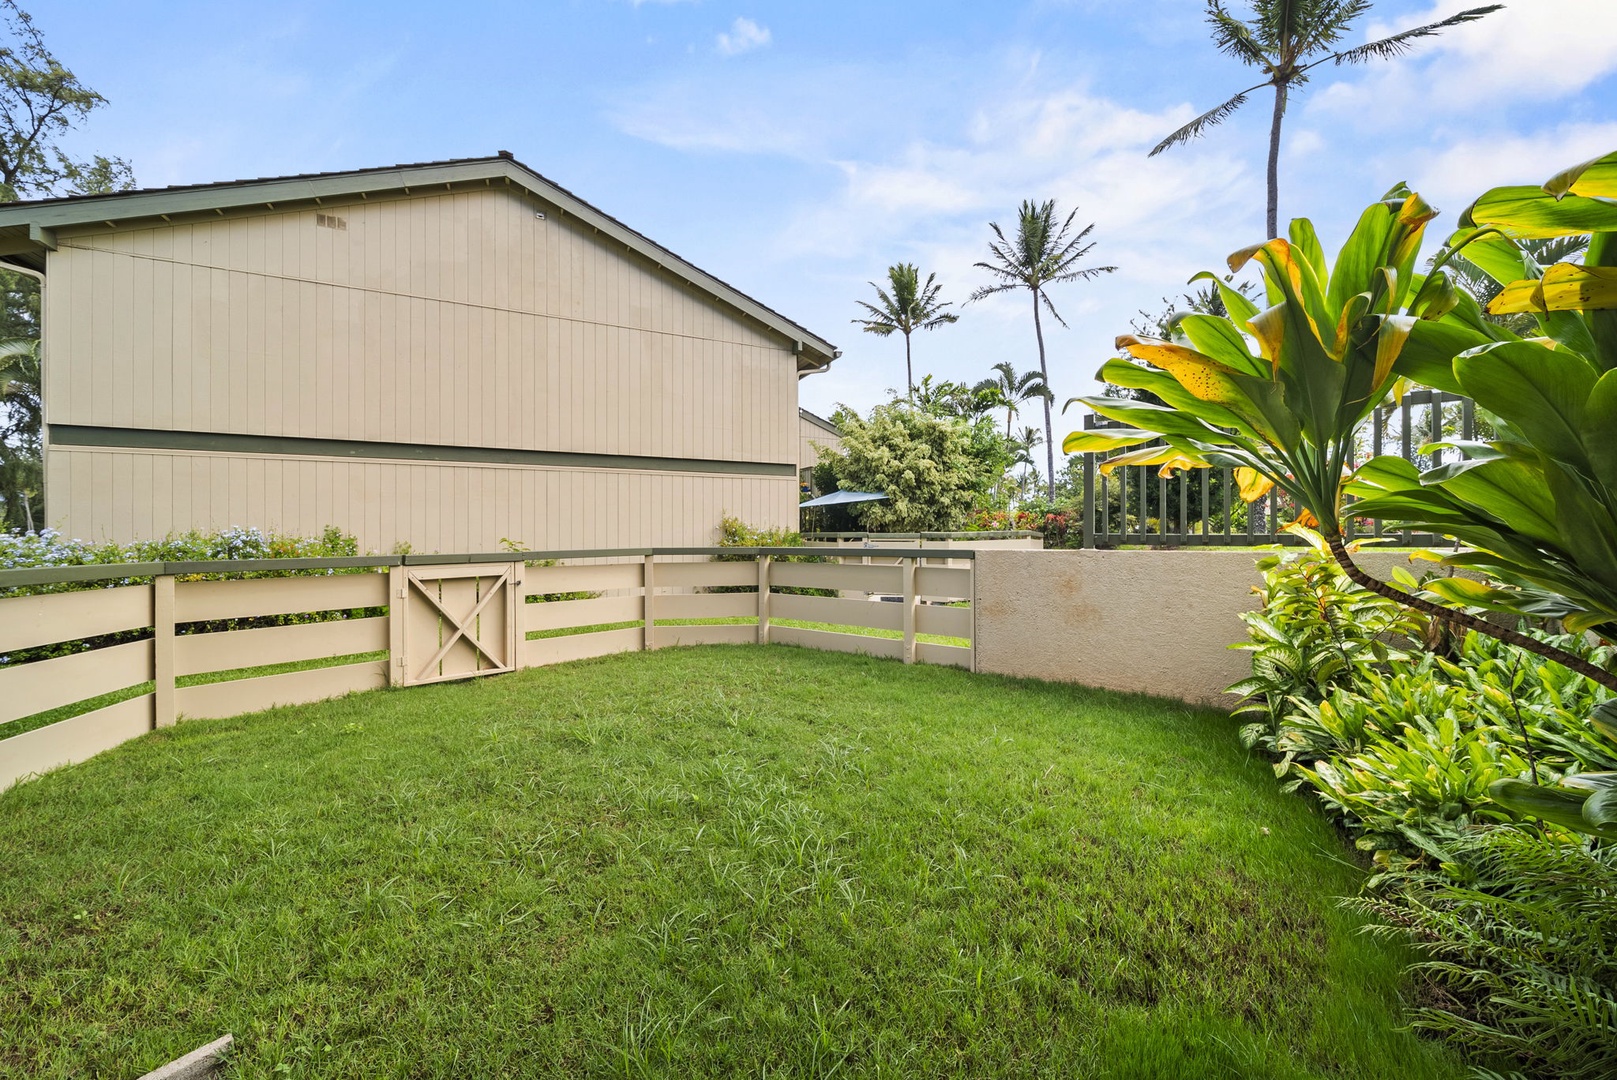 Kahuku Vacation Rentals, Kuilima Estates West #85 - Private, fenced in yard just outside the kitchen doors.